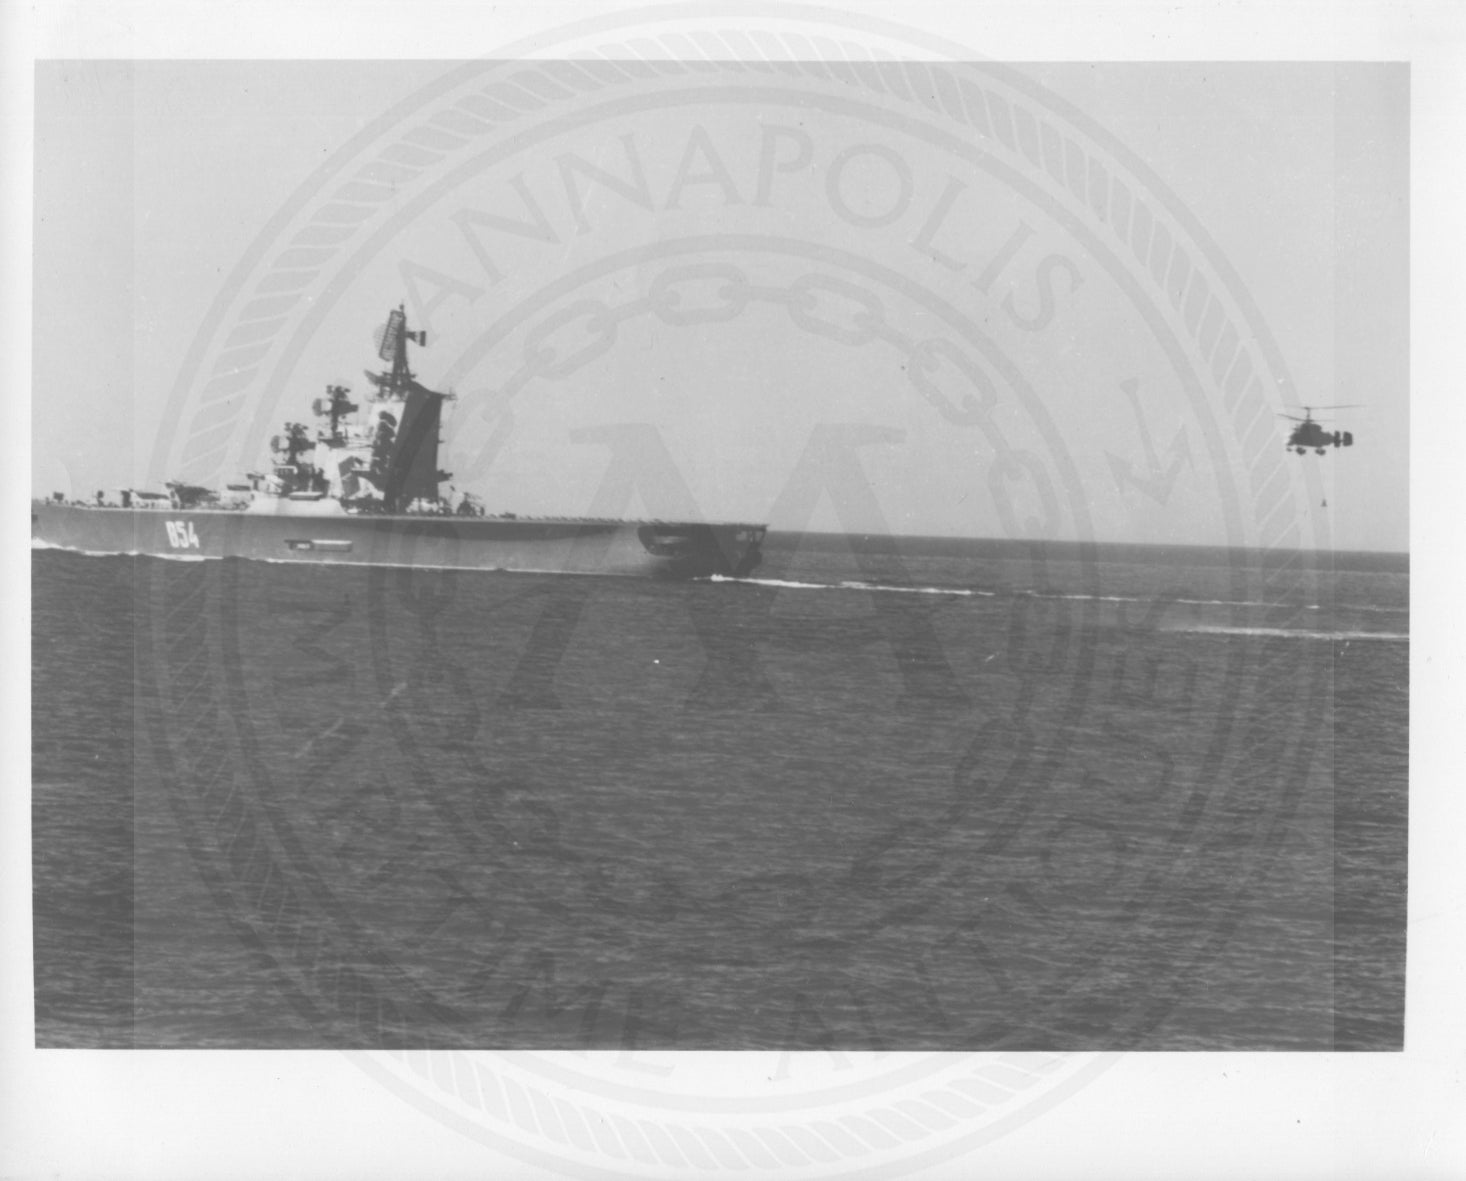 Official U.S. Navy photo the Soviet missile cruiser Moskva class - Annapolis Maritime Antiques